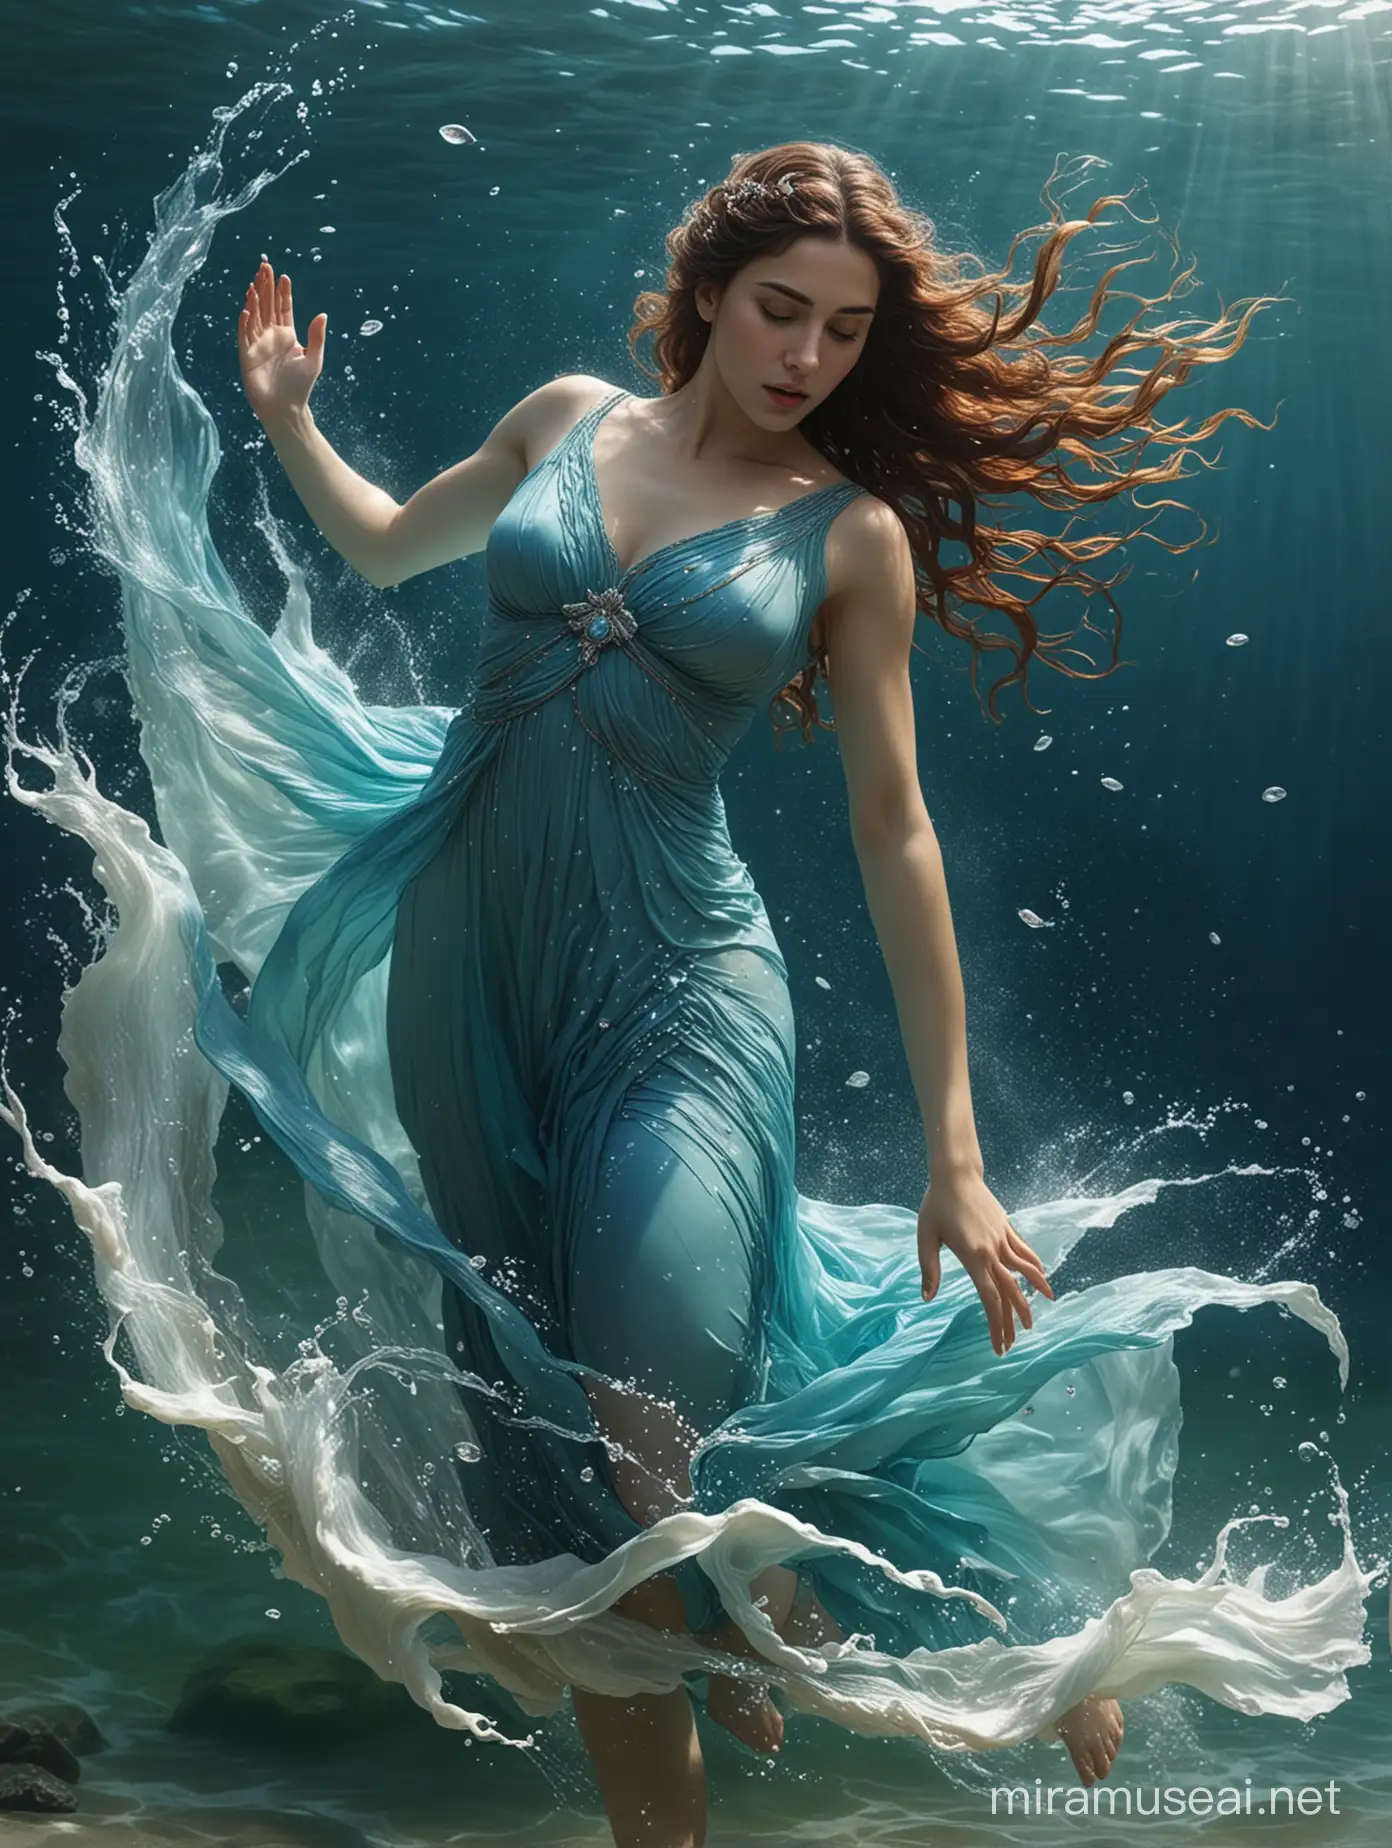 A masterpieced of Kimiya Hosseini as Leucothea, Greek goddess of the sea. She is under the sea, and her blue dress flows ethereally in the water until it mixes with the water until it disappears.